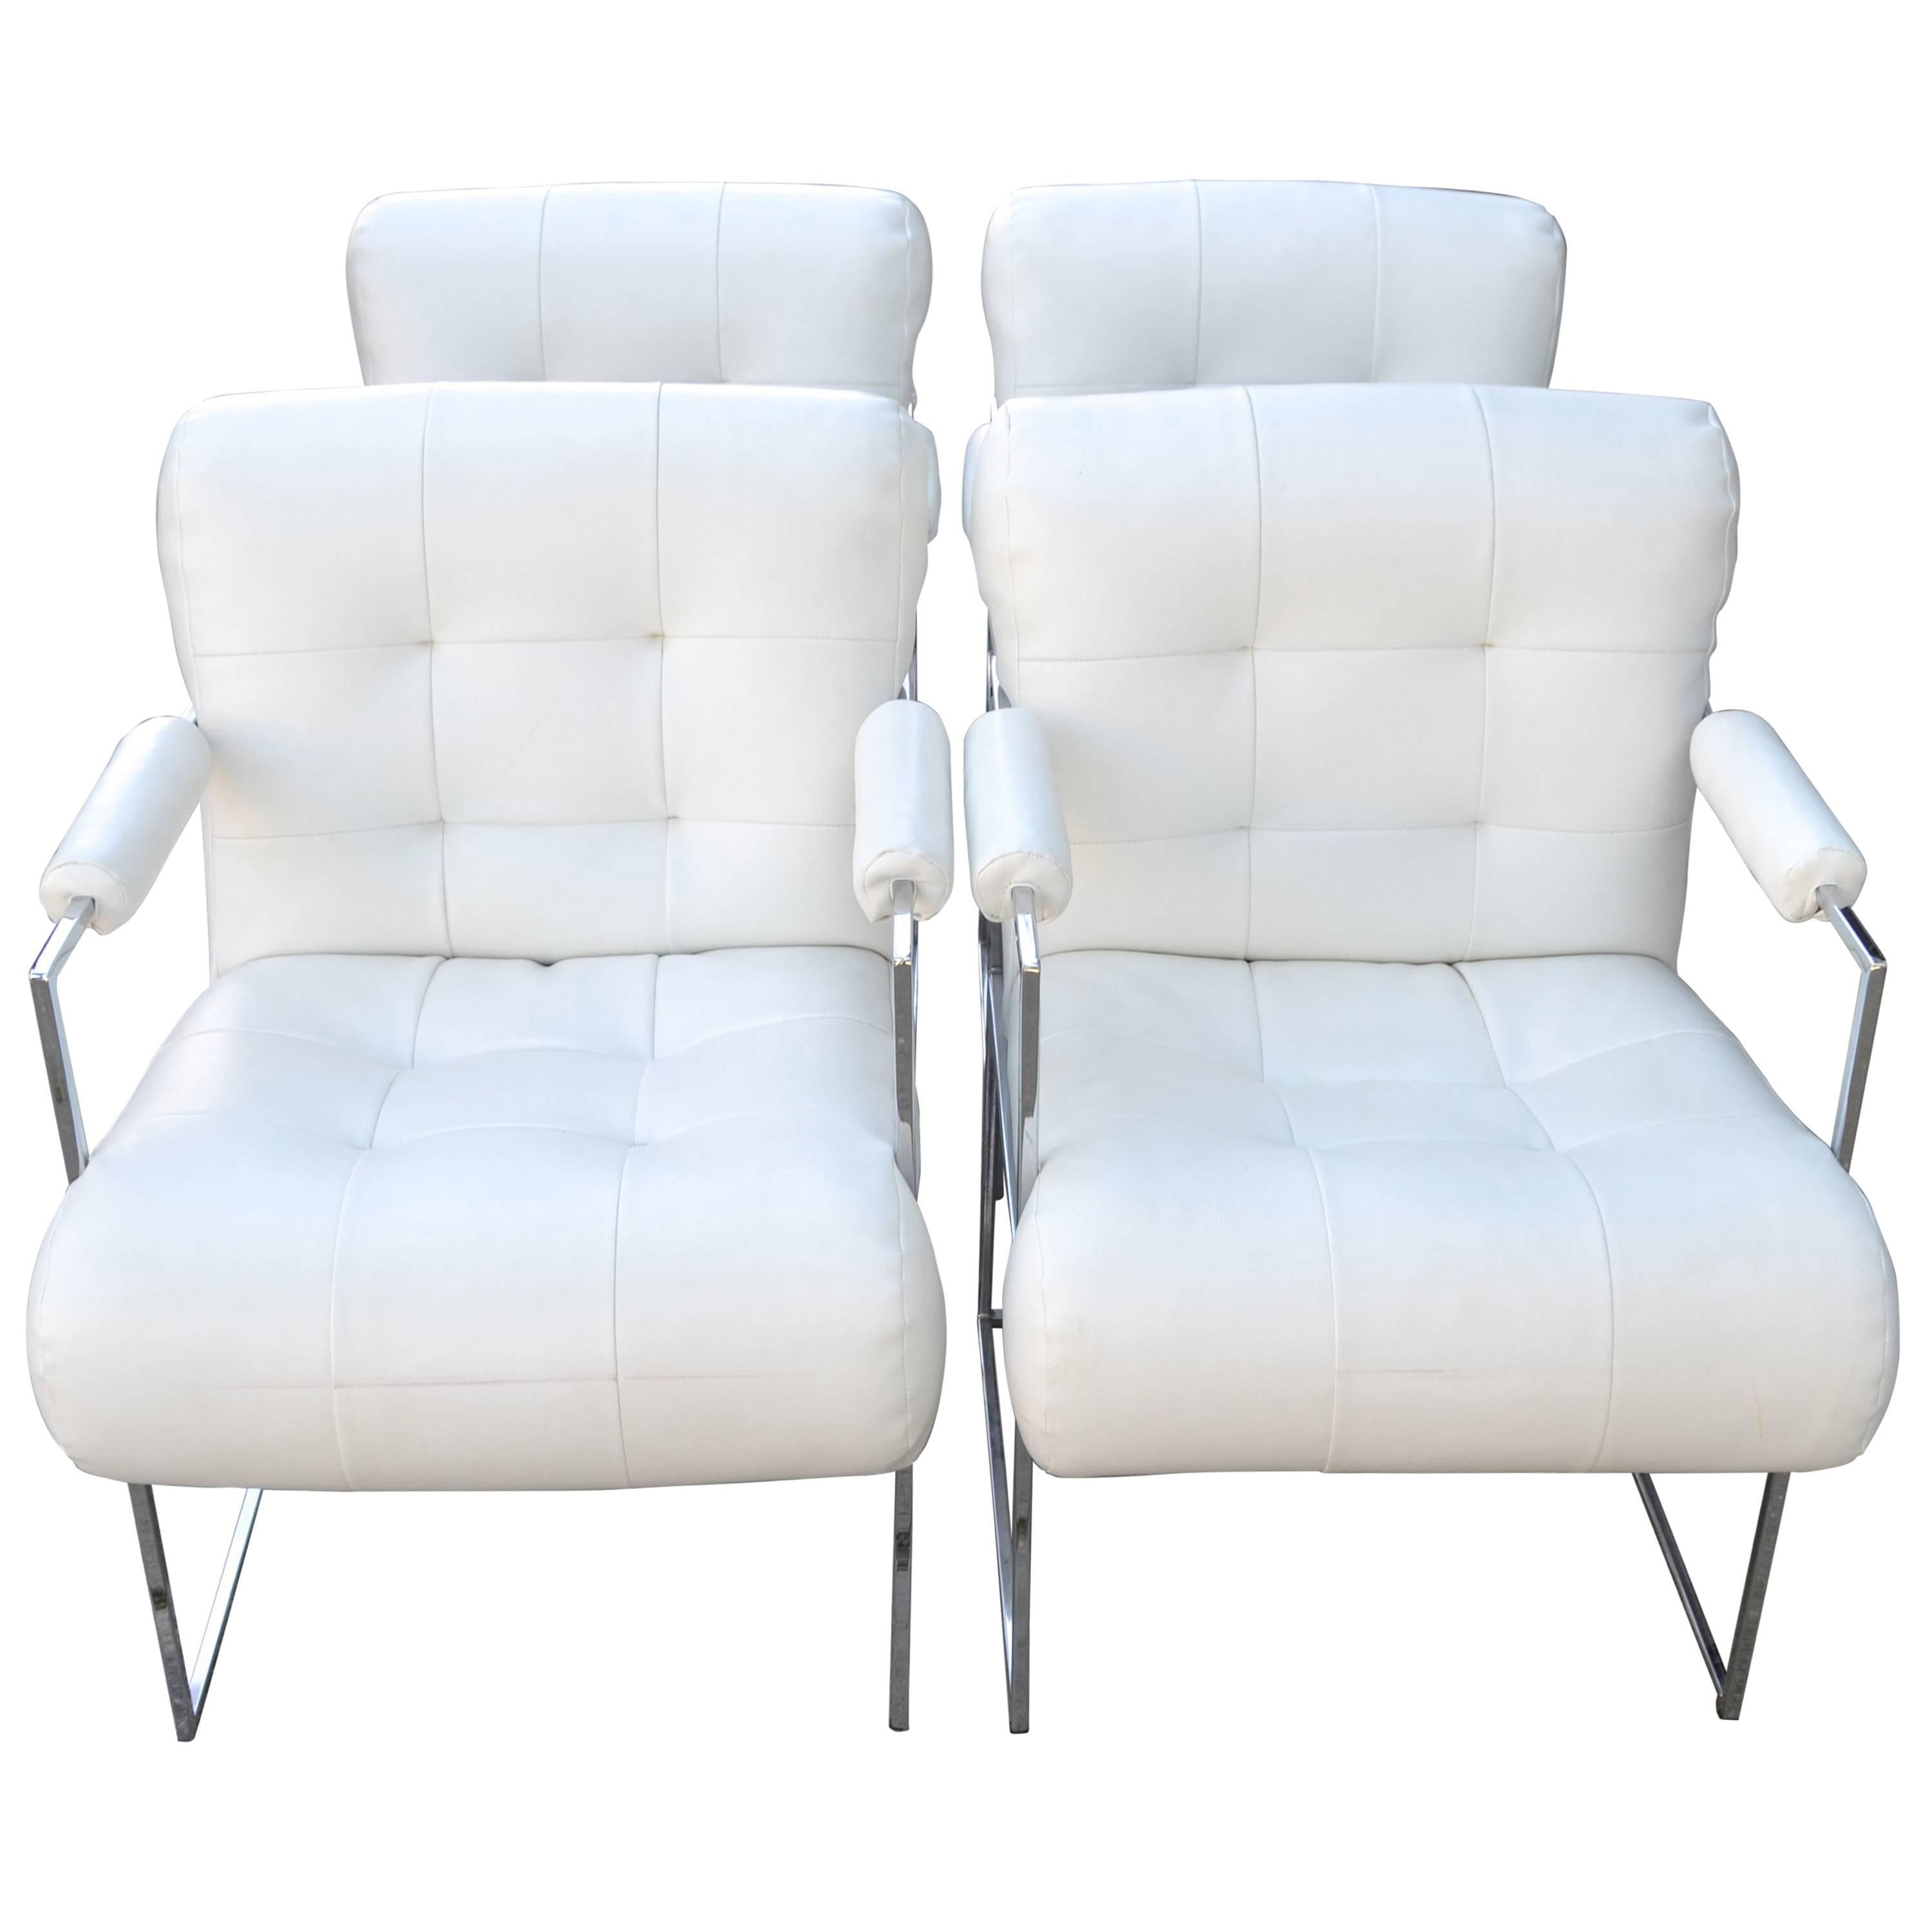 Set of Four Mid-Century Dining Armchairs in White Naugahyde by Milo Baughman For Sale